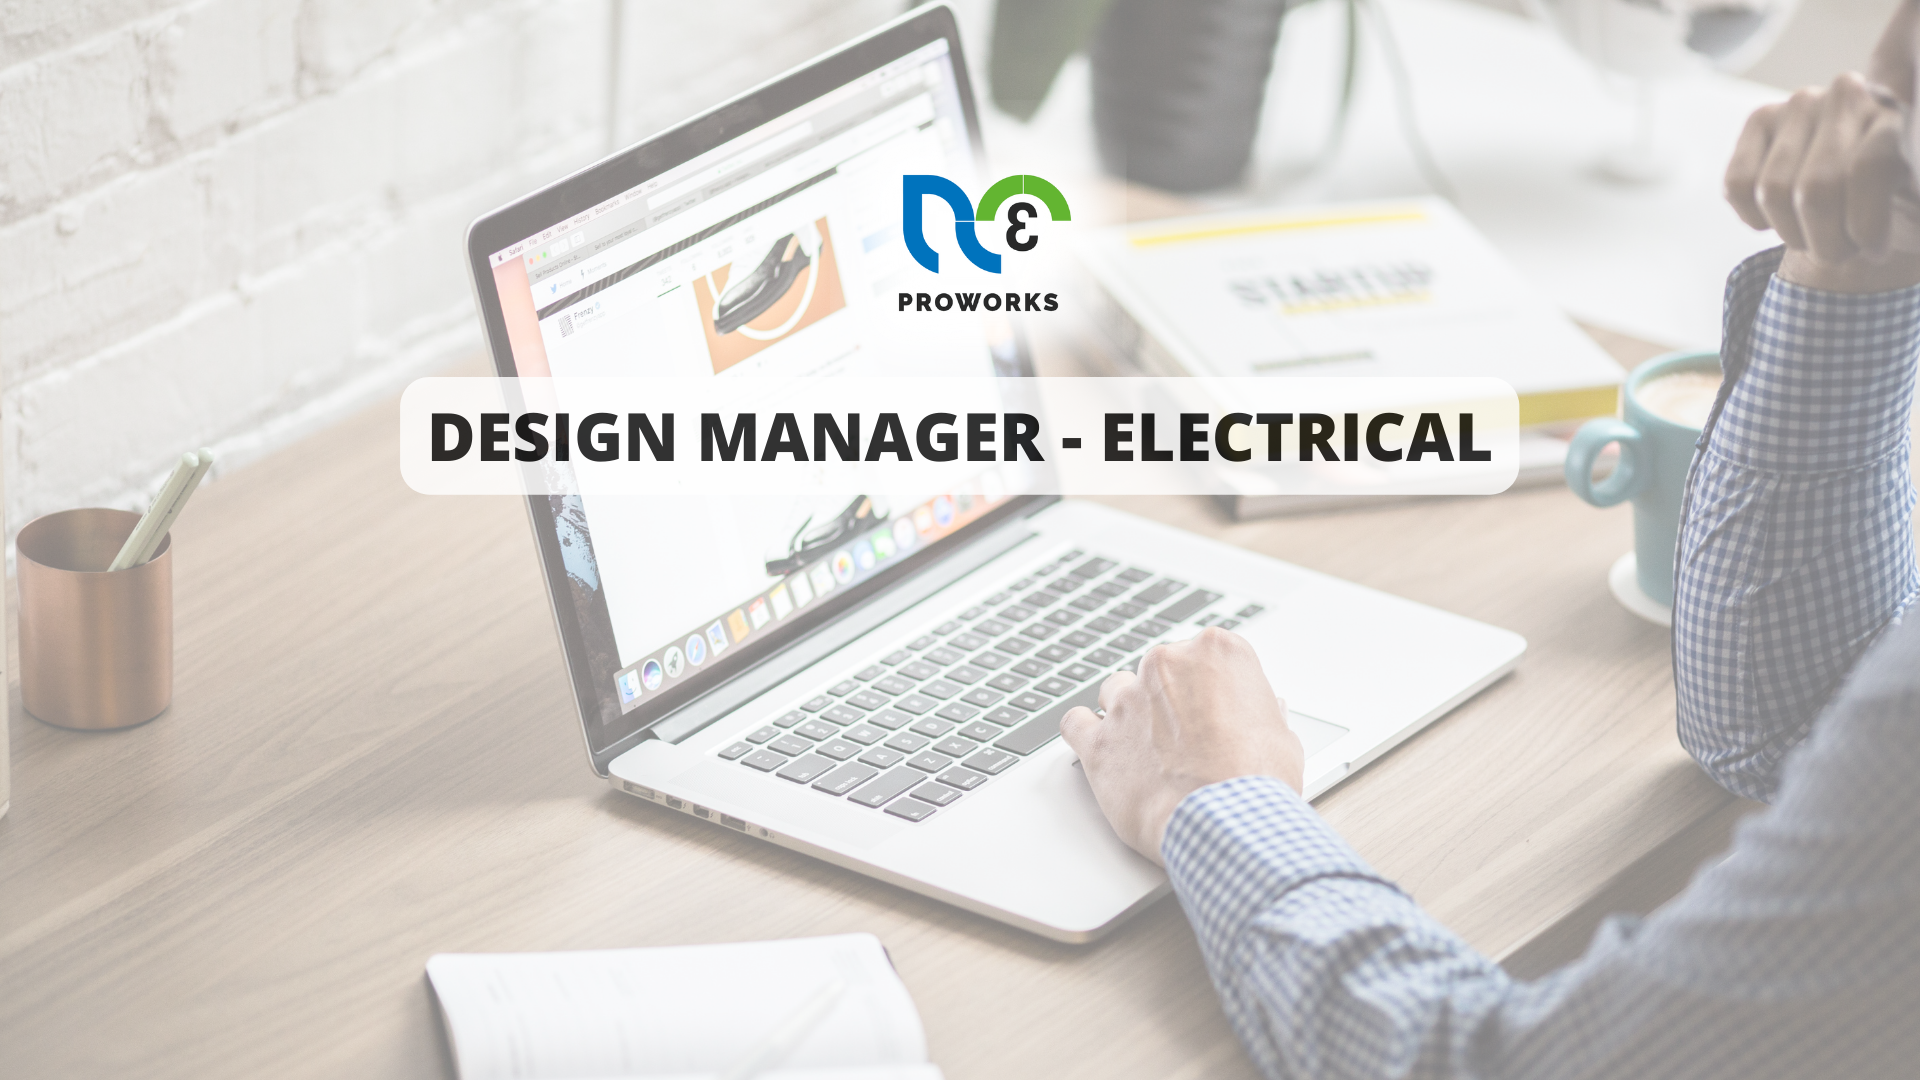 Design Manager - Electrical